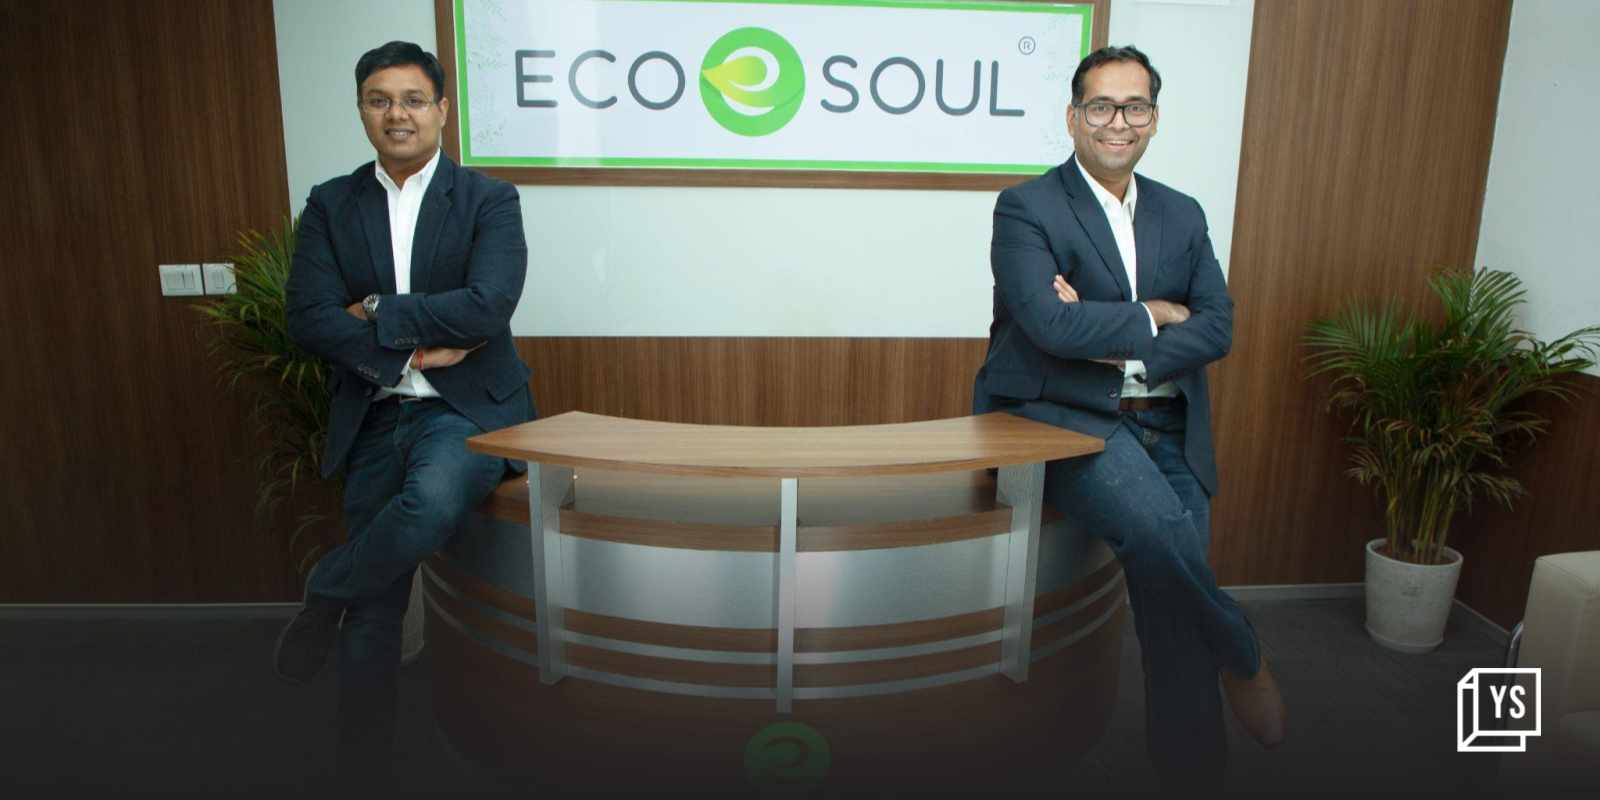 EcoSoul Home bags $10M in Series A round led by Accel Partners, Singh Capital Partners